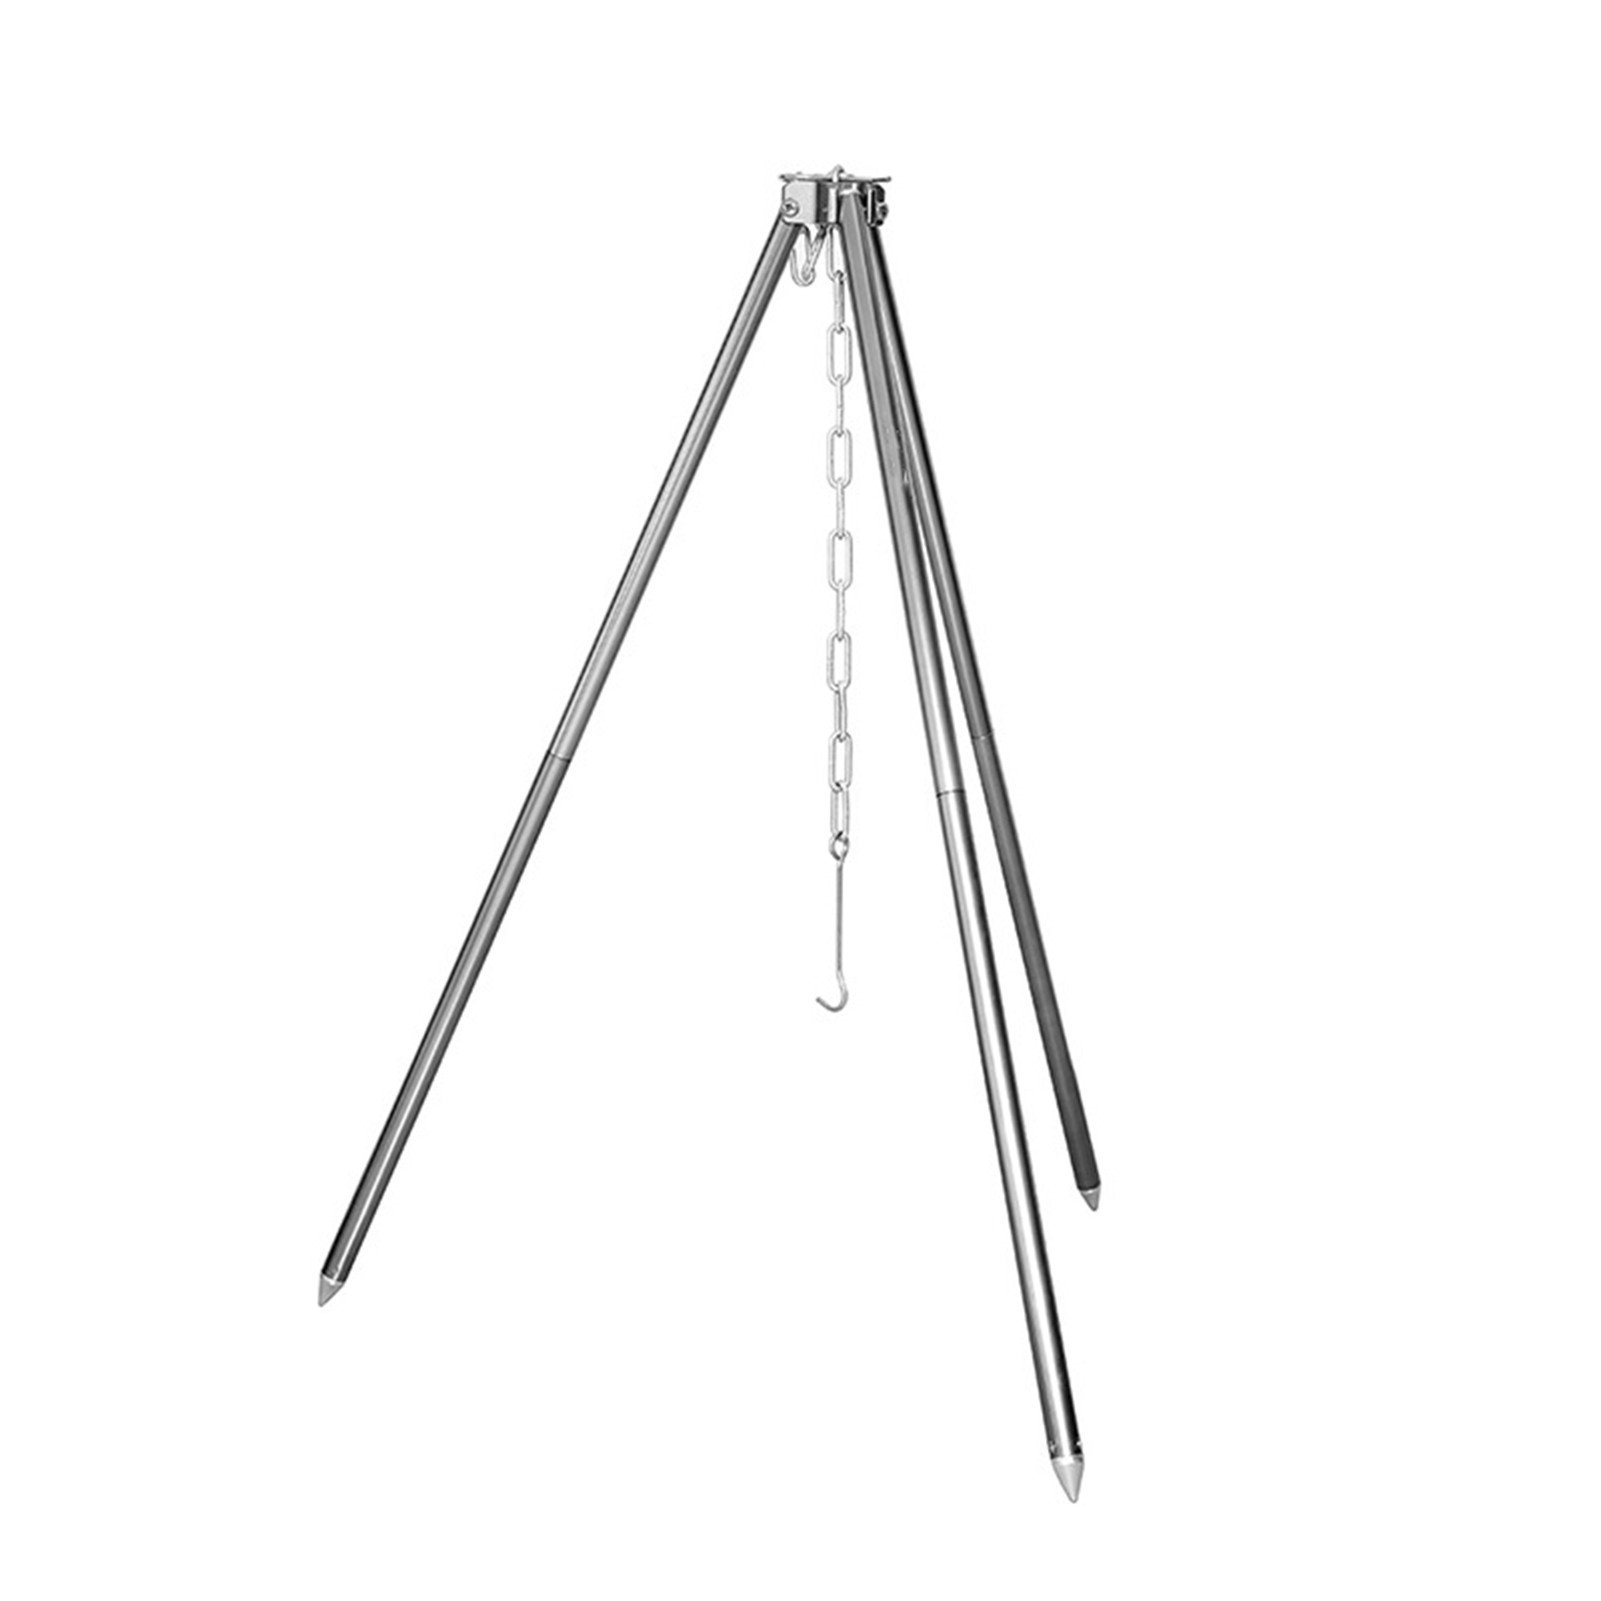 SPRING PARK Camping Tripod Campfire Cooking Oven Mini Adjustable Grill Tripod Cooker Campfire Grill Stand Tripod Grilling Cooking Lantern Tripod Hanger for Camping Activities - image 1 of 7